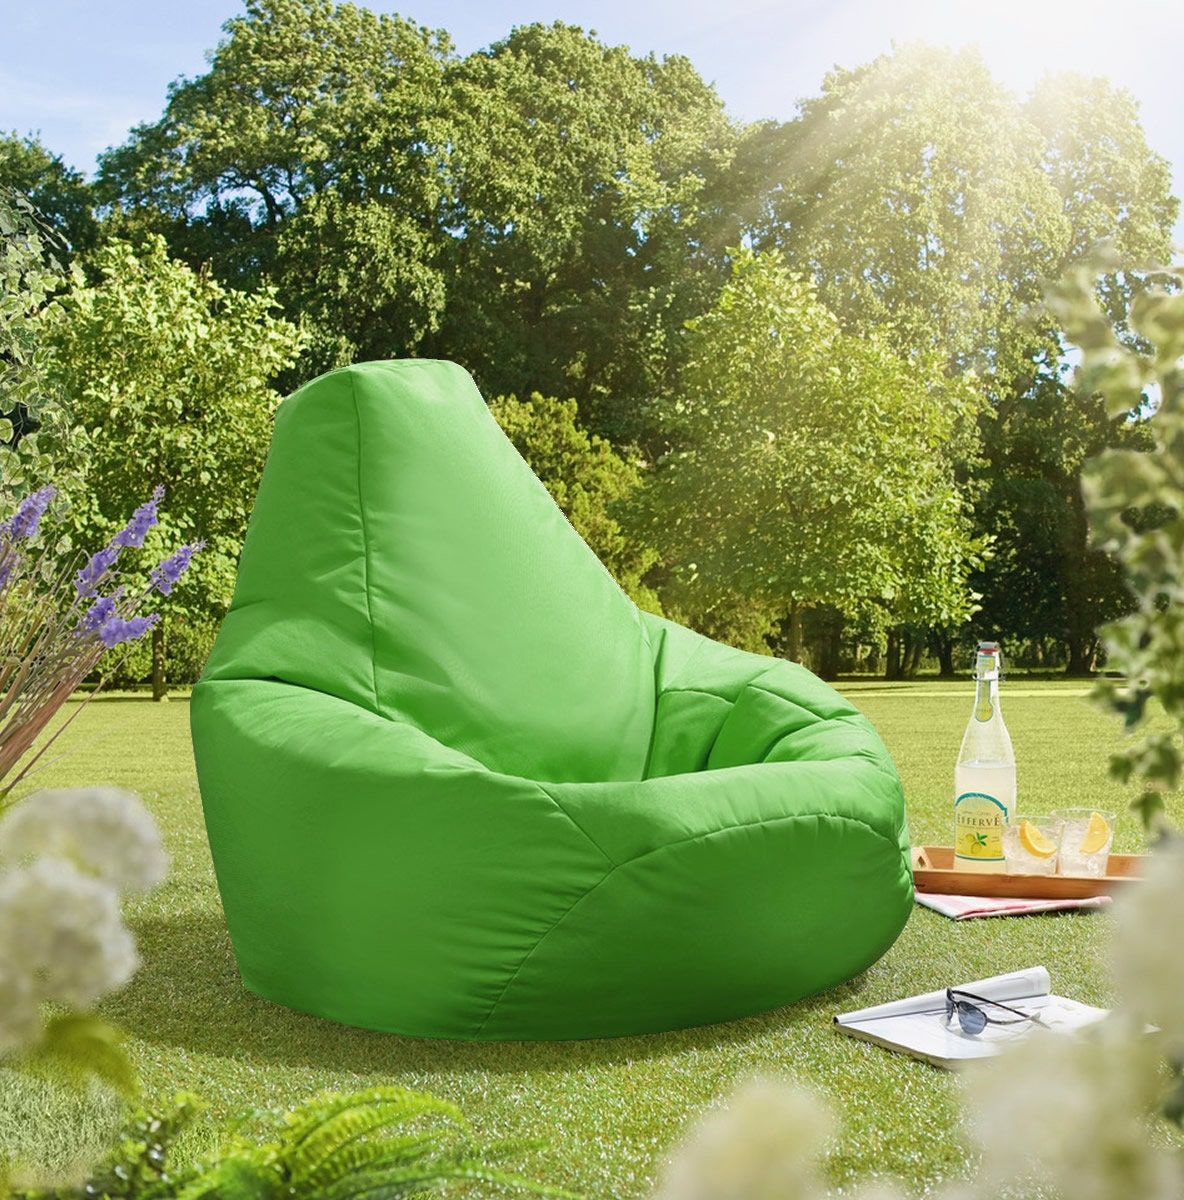 The Ultimate Comfort: Outdoor Bean Bag Chairs for Grown-Ups